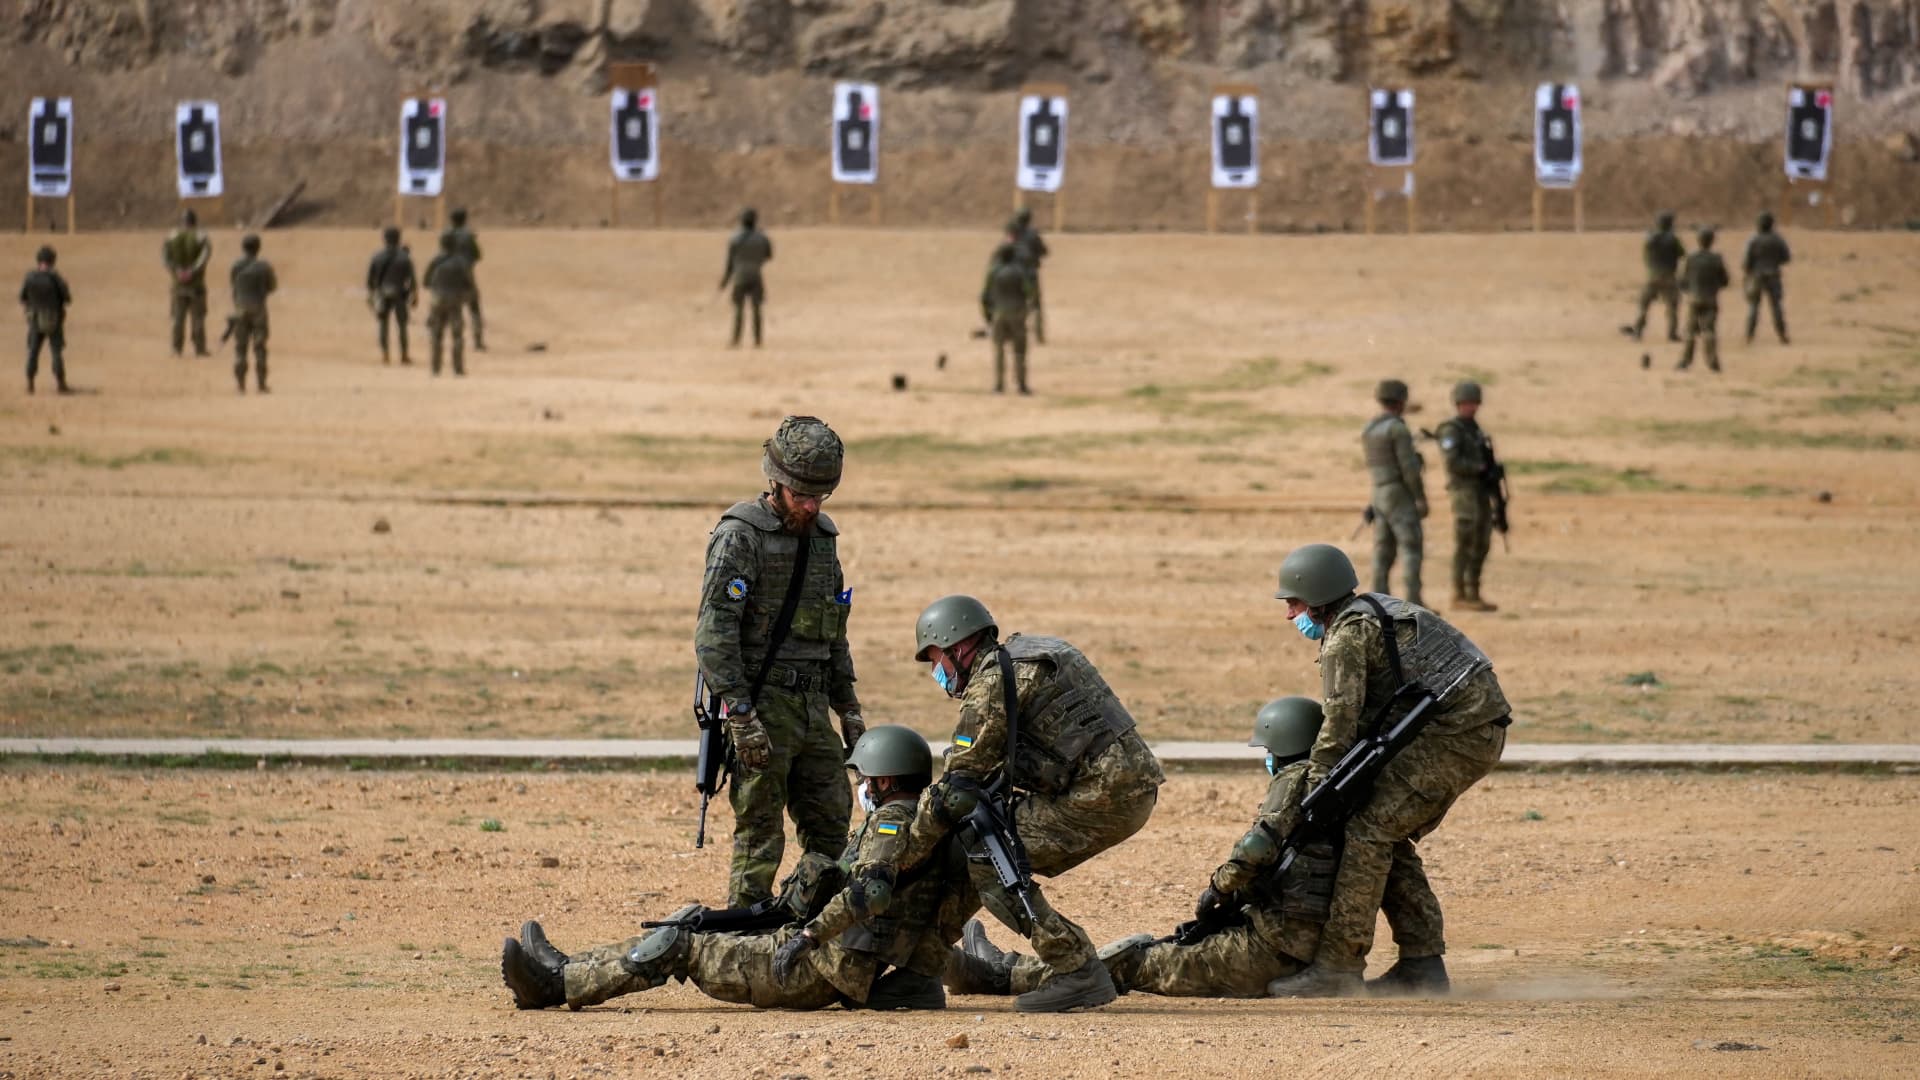 Armed Ukrainian military personnel take part in a medical evacuation training exercise, conducted by the Spanish military, at the Toledo infantry academy in Toledo, Spain, on Friday, March 24, 2023. 